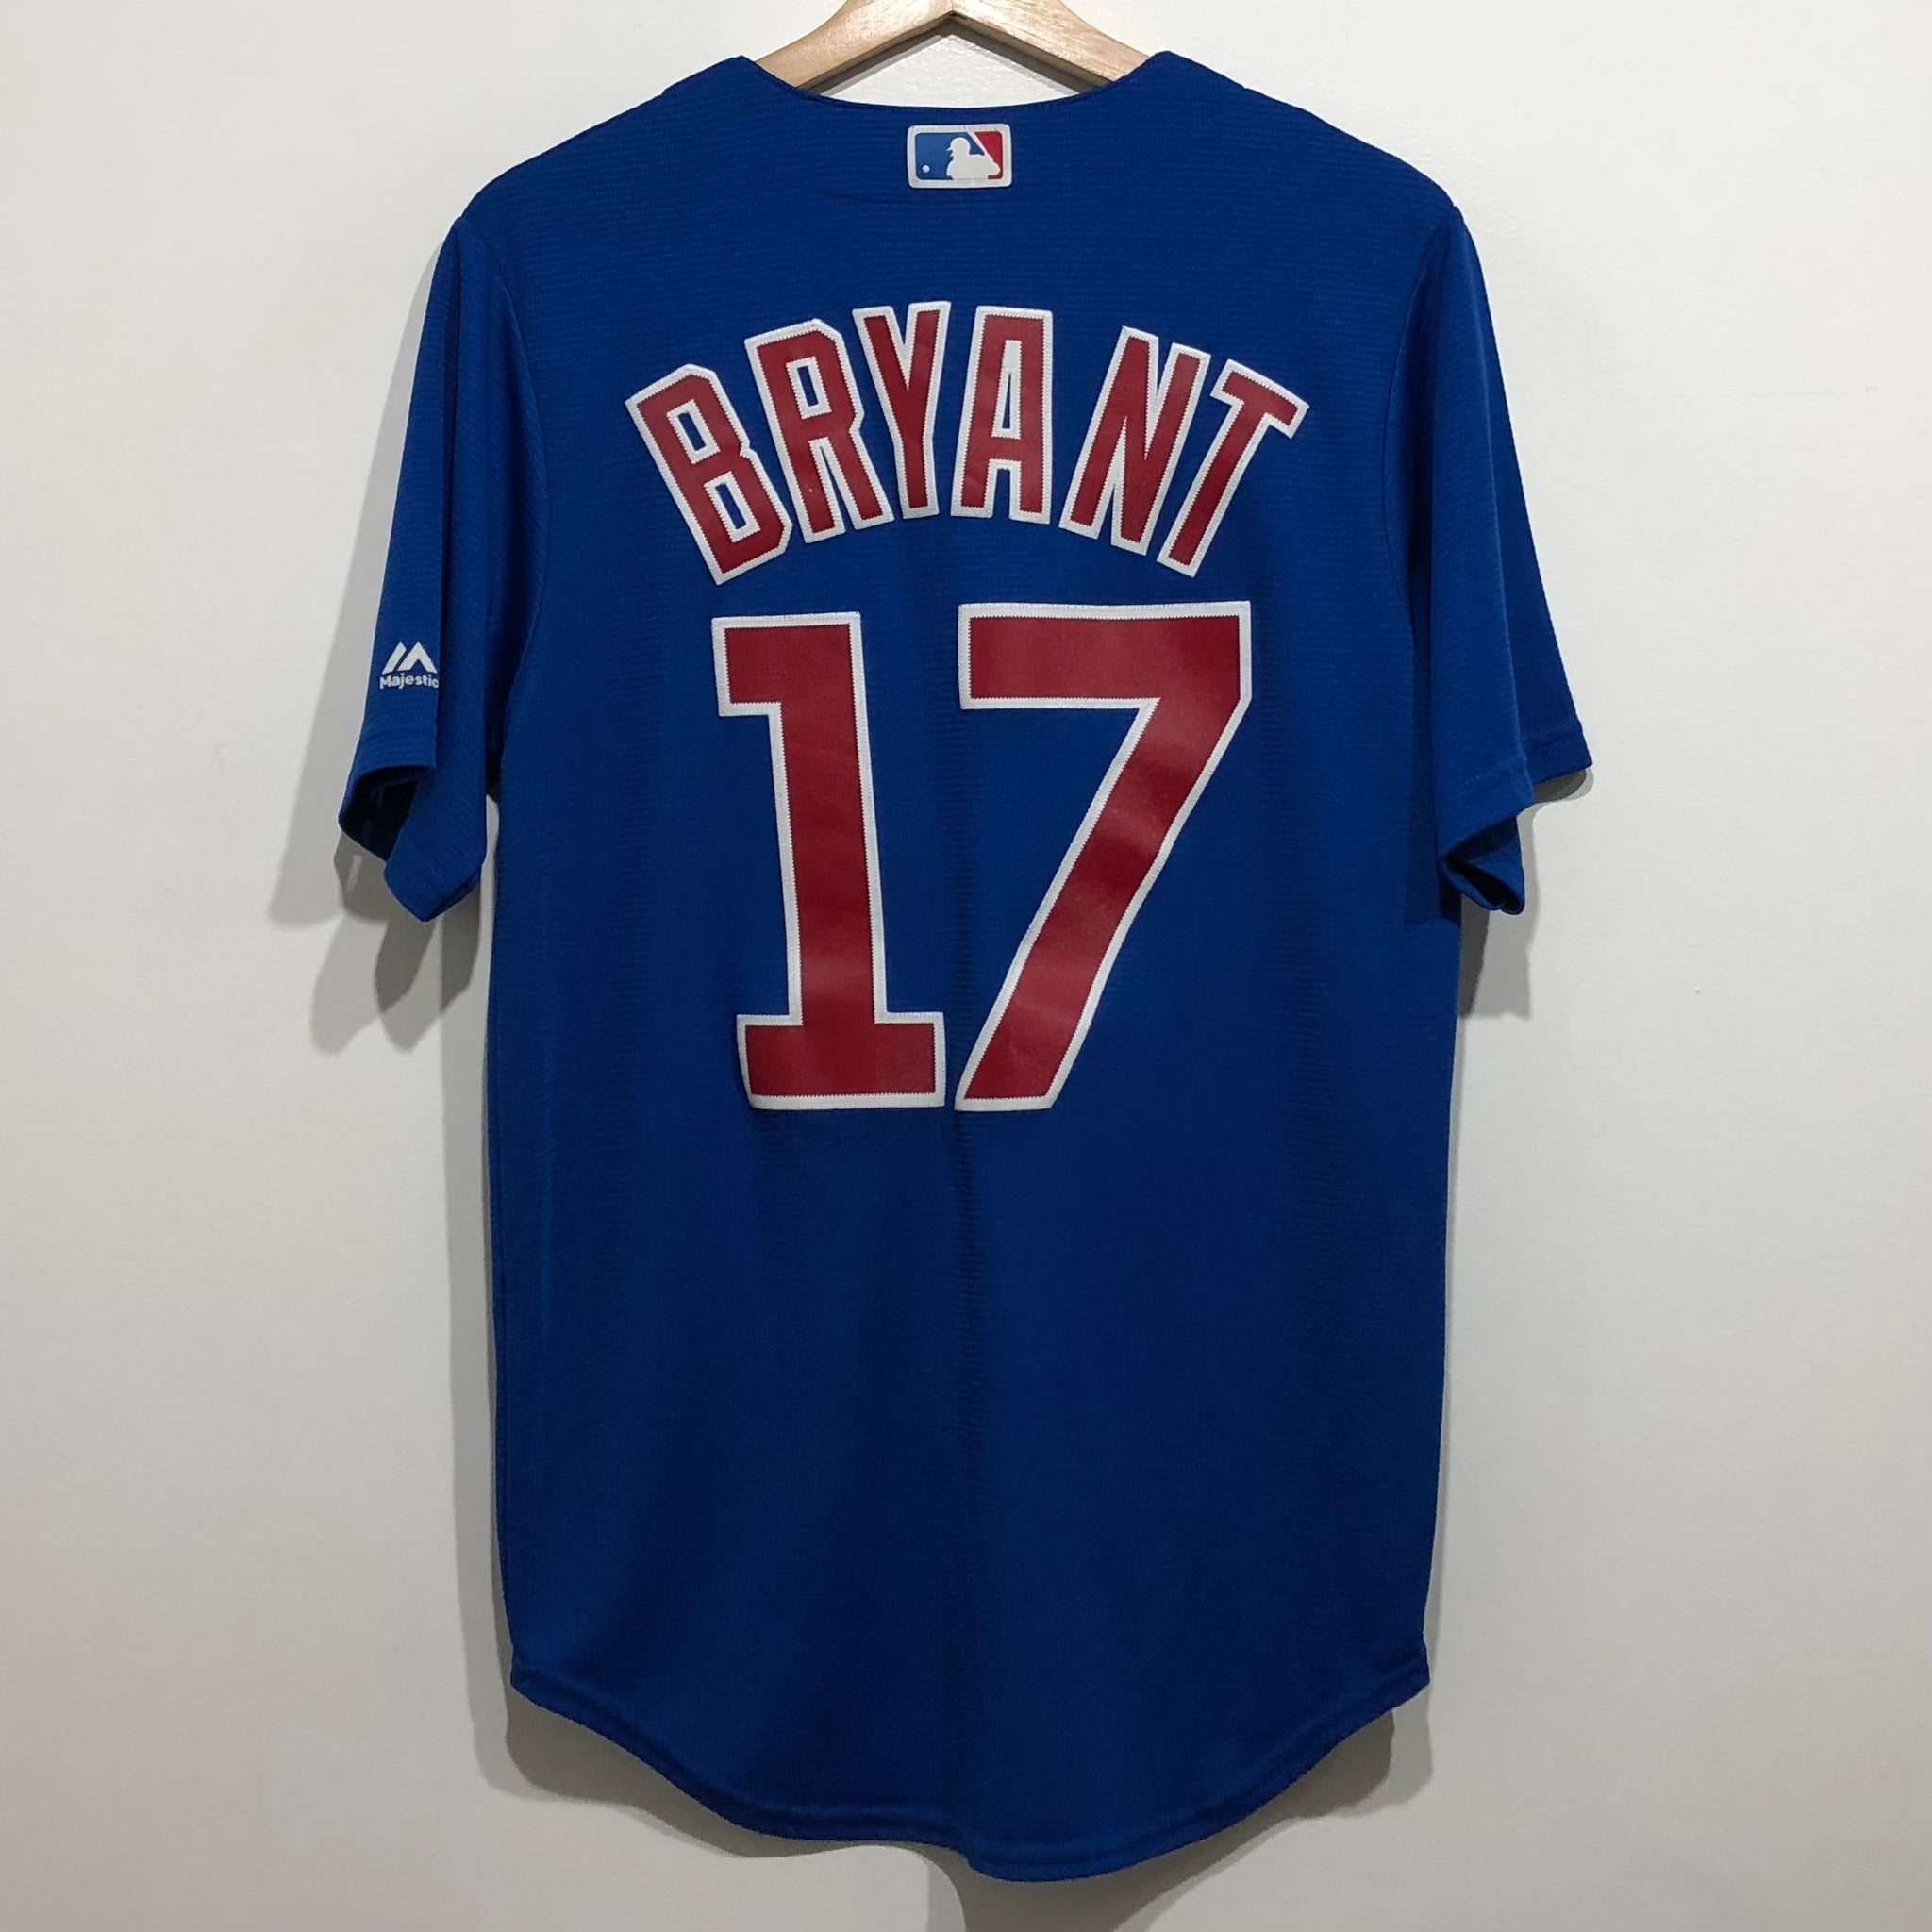 chicago cubs kris bryant jersey